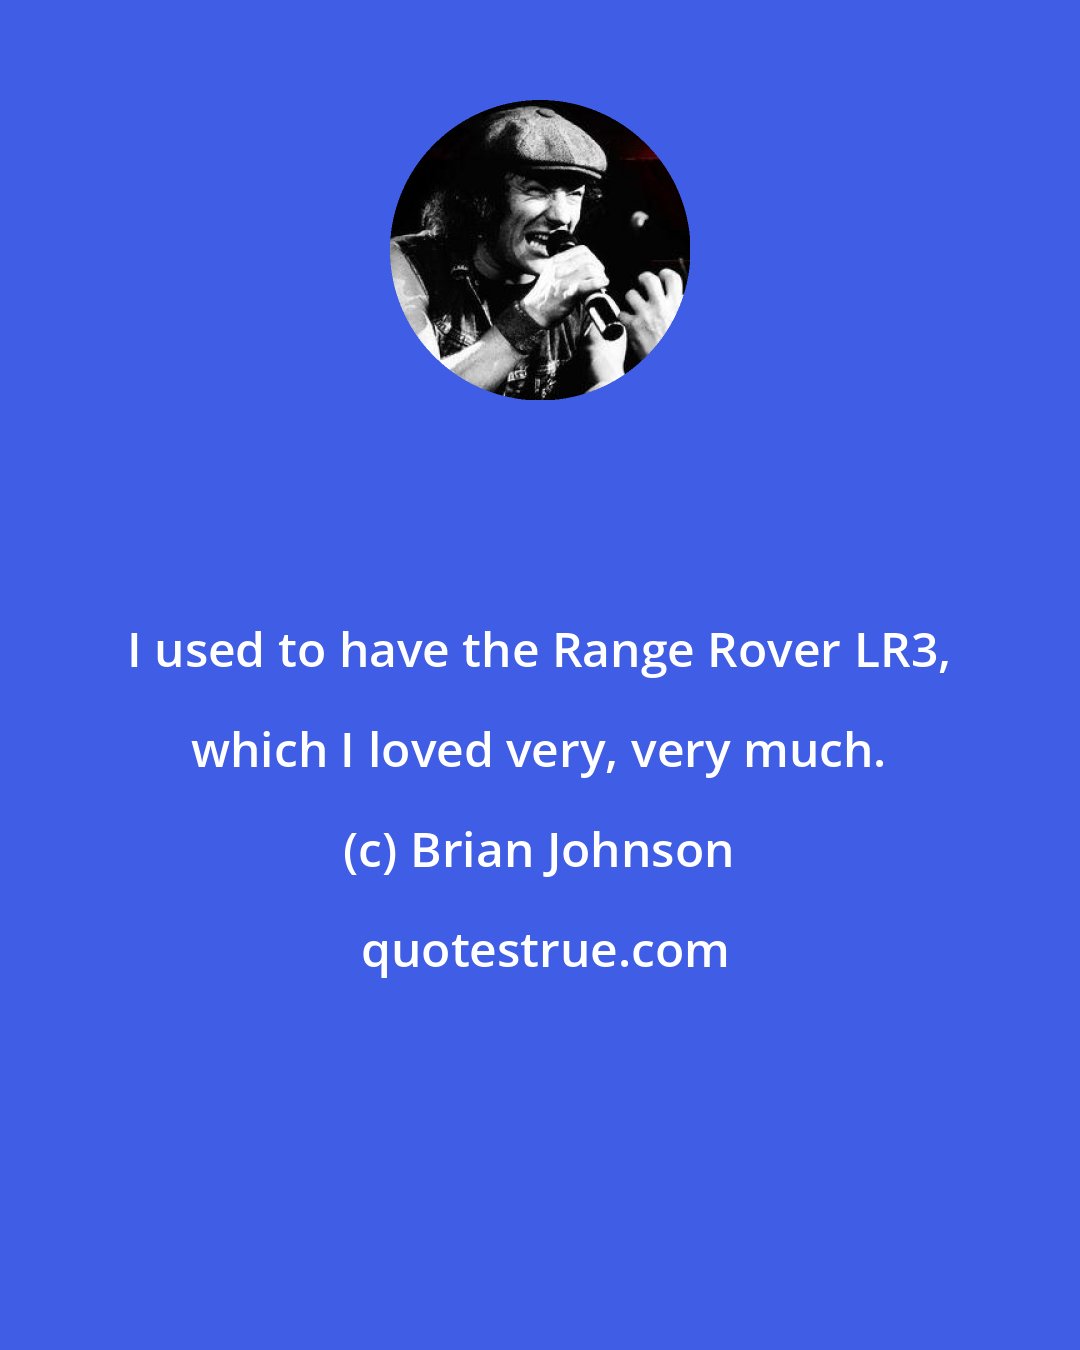 Brian Johnson: I used to have the Range Rover LR3, which I loved very, very much.